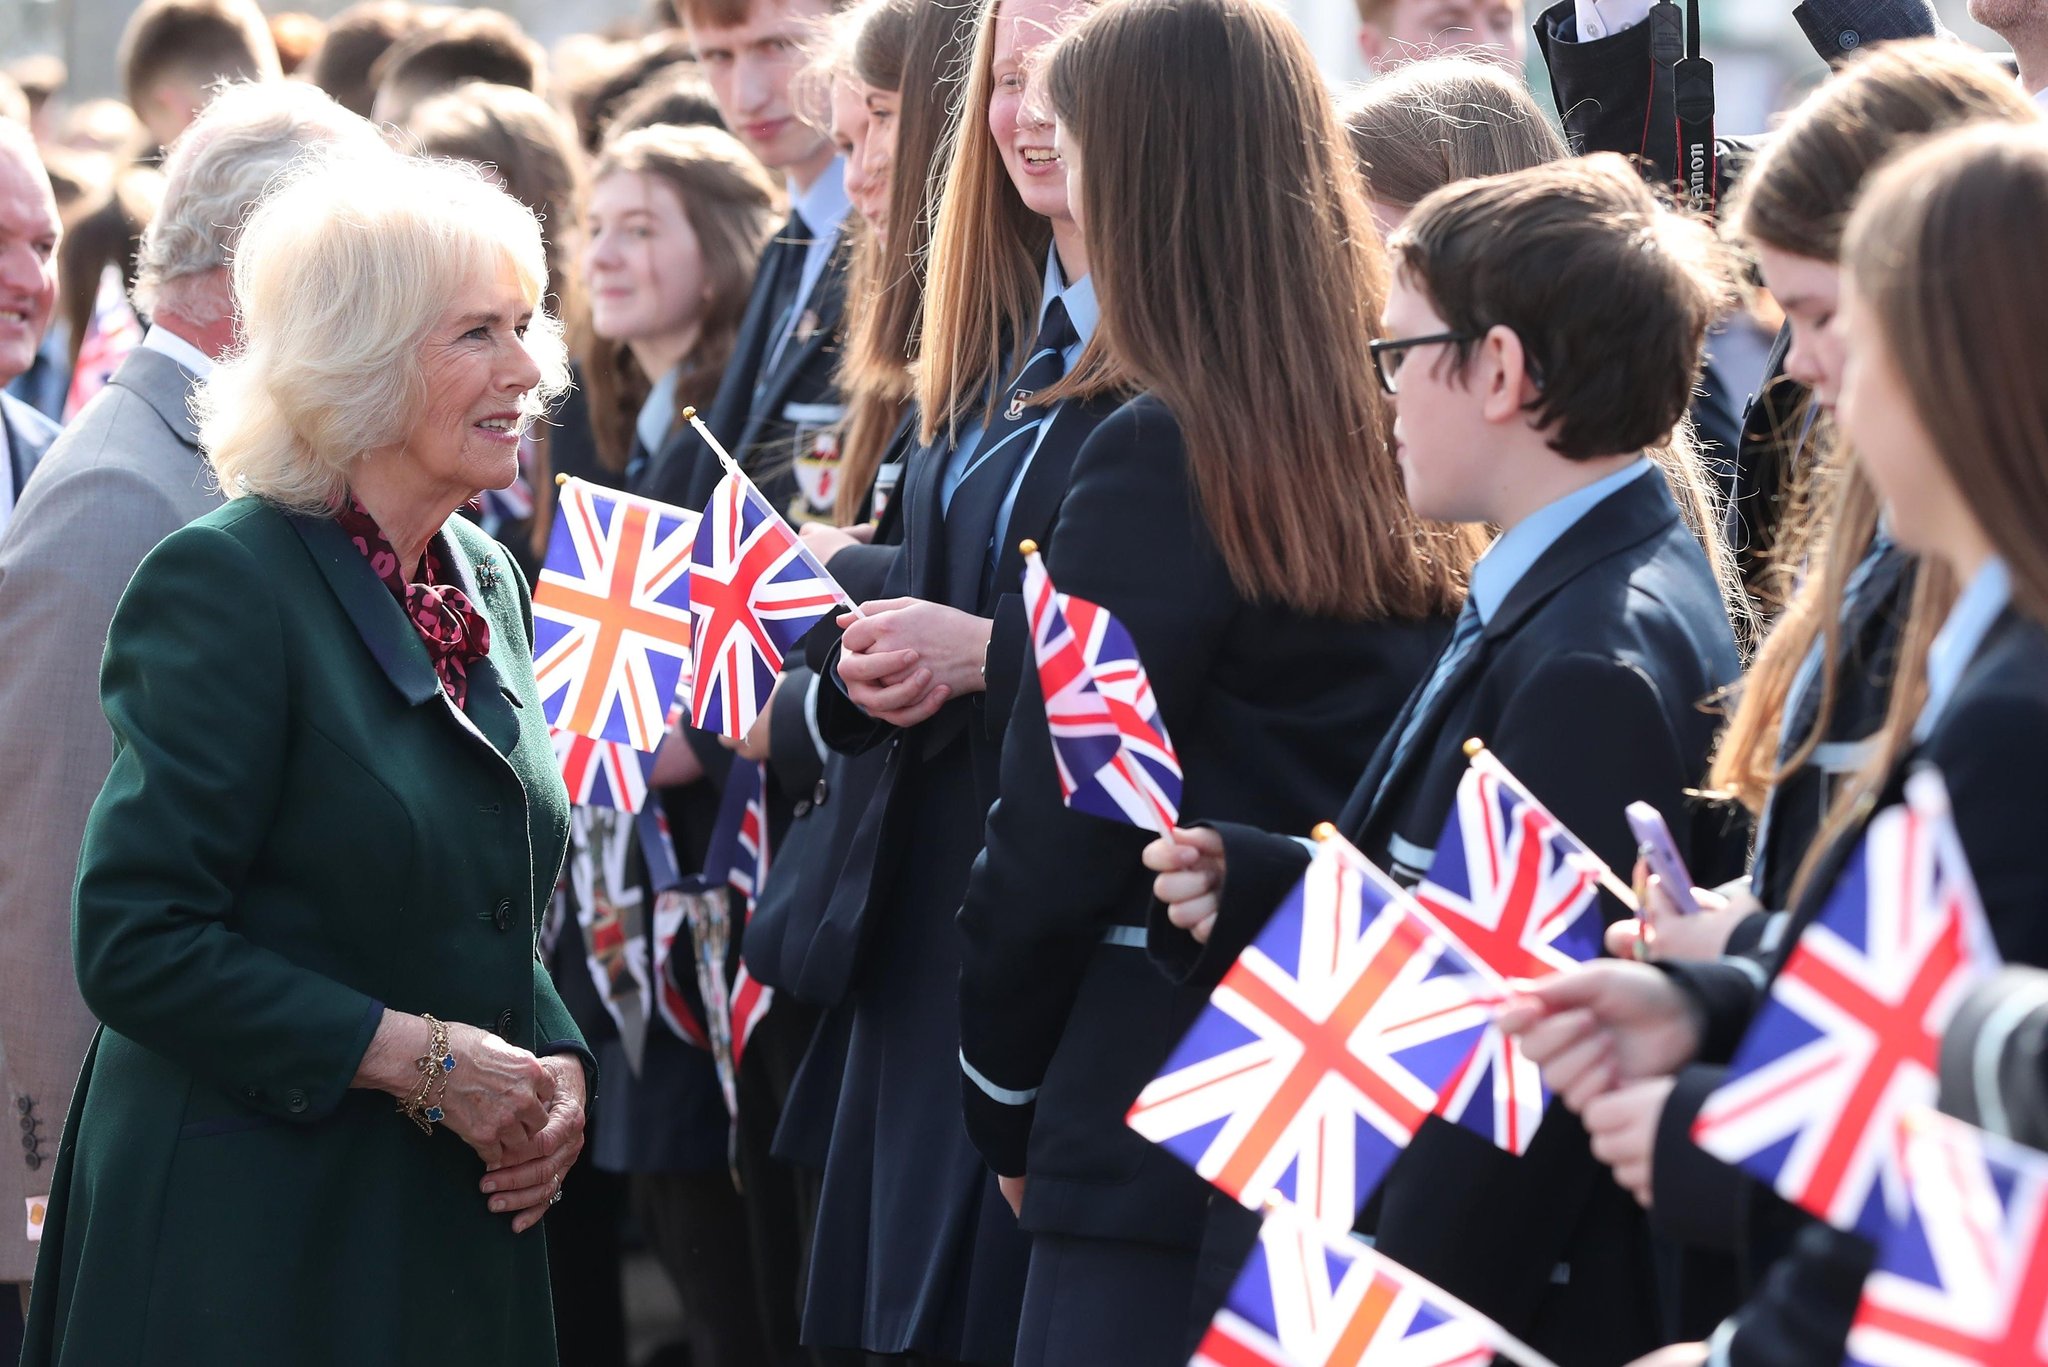 Prince of Wales and Duchess of Cornwall start two day visit to Northern Ireland